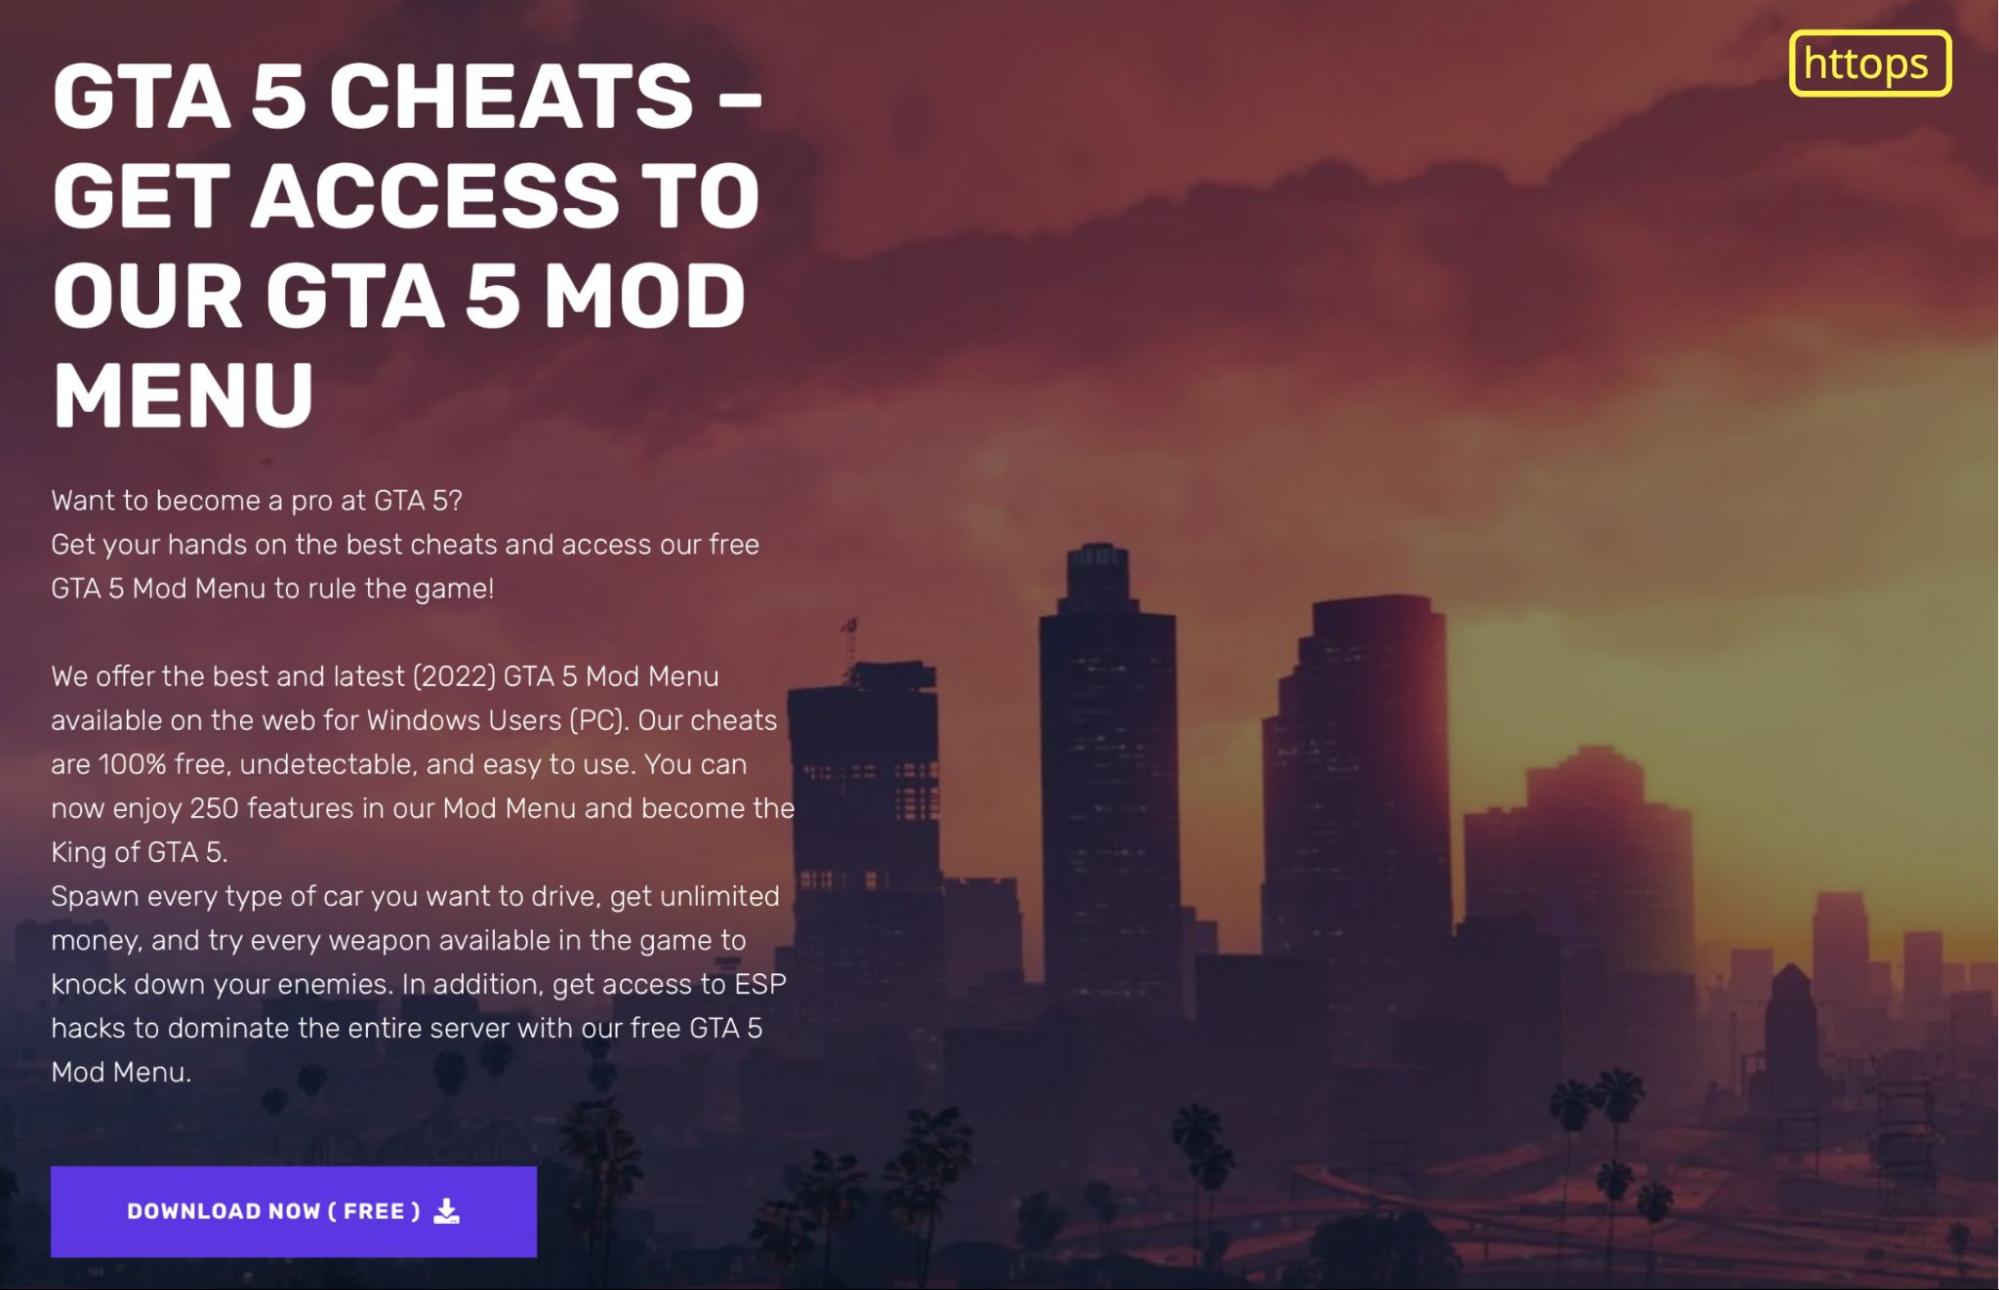 A screenshot of the landing page. The header reads GTA 5 CHEATS - GET ACCESS TO OUR GTA 5 MOD MENU.